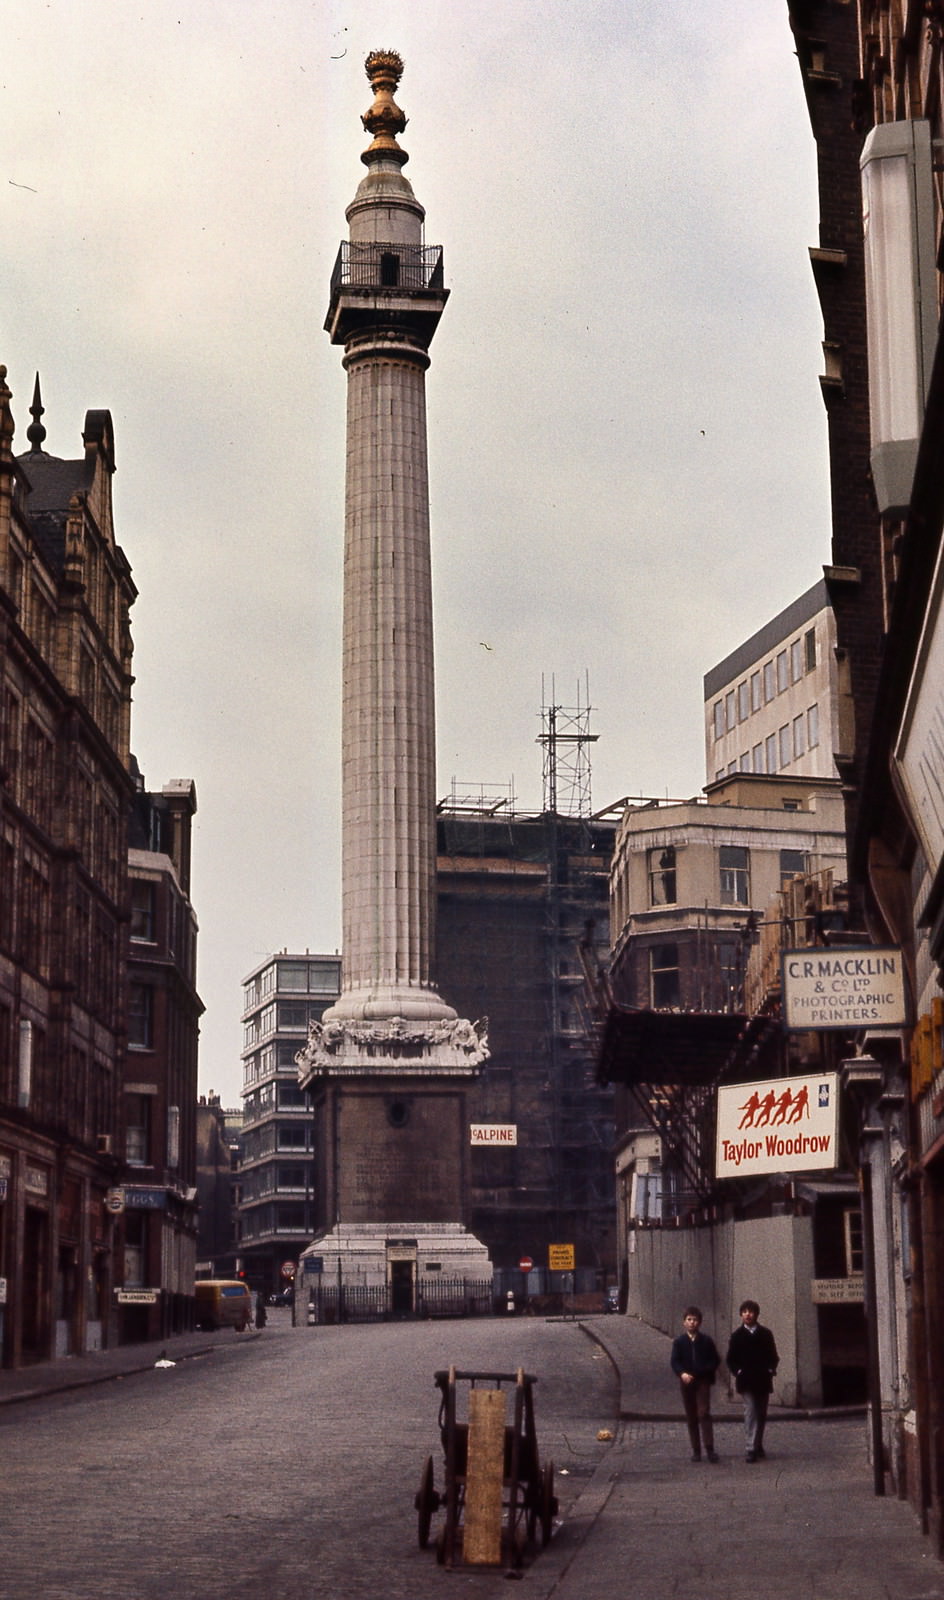 The Monument, London, February 1971